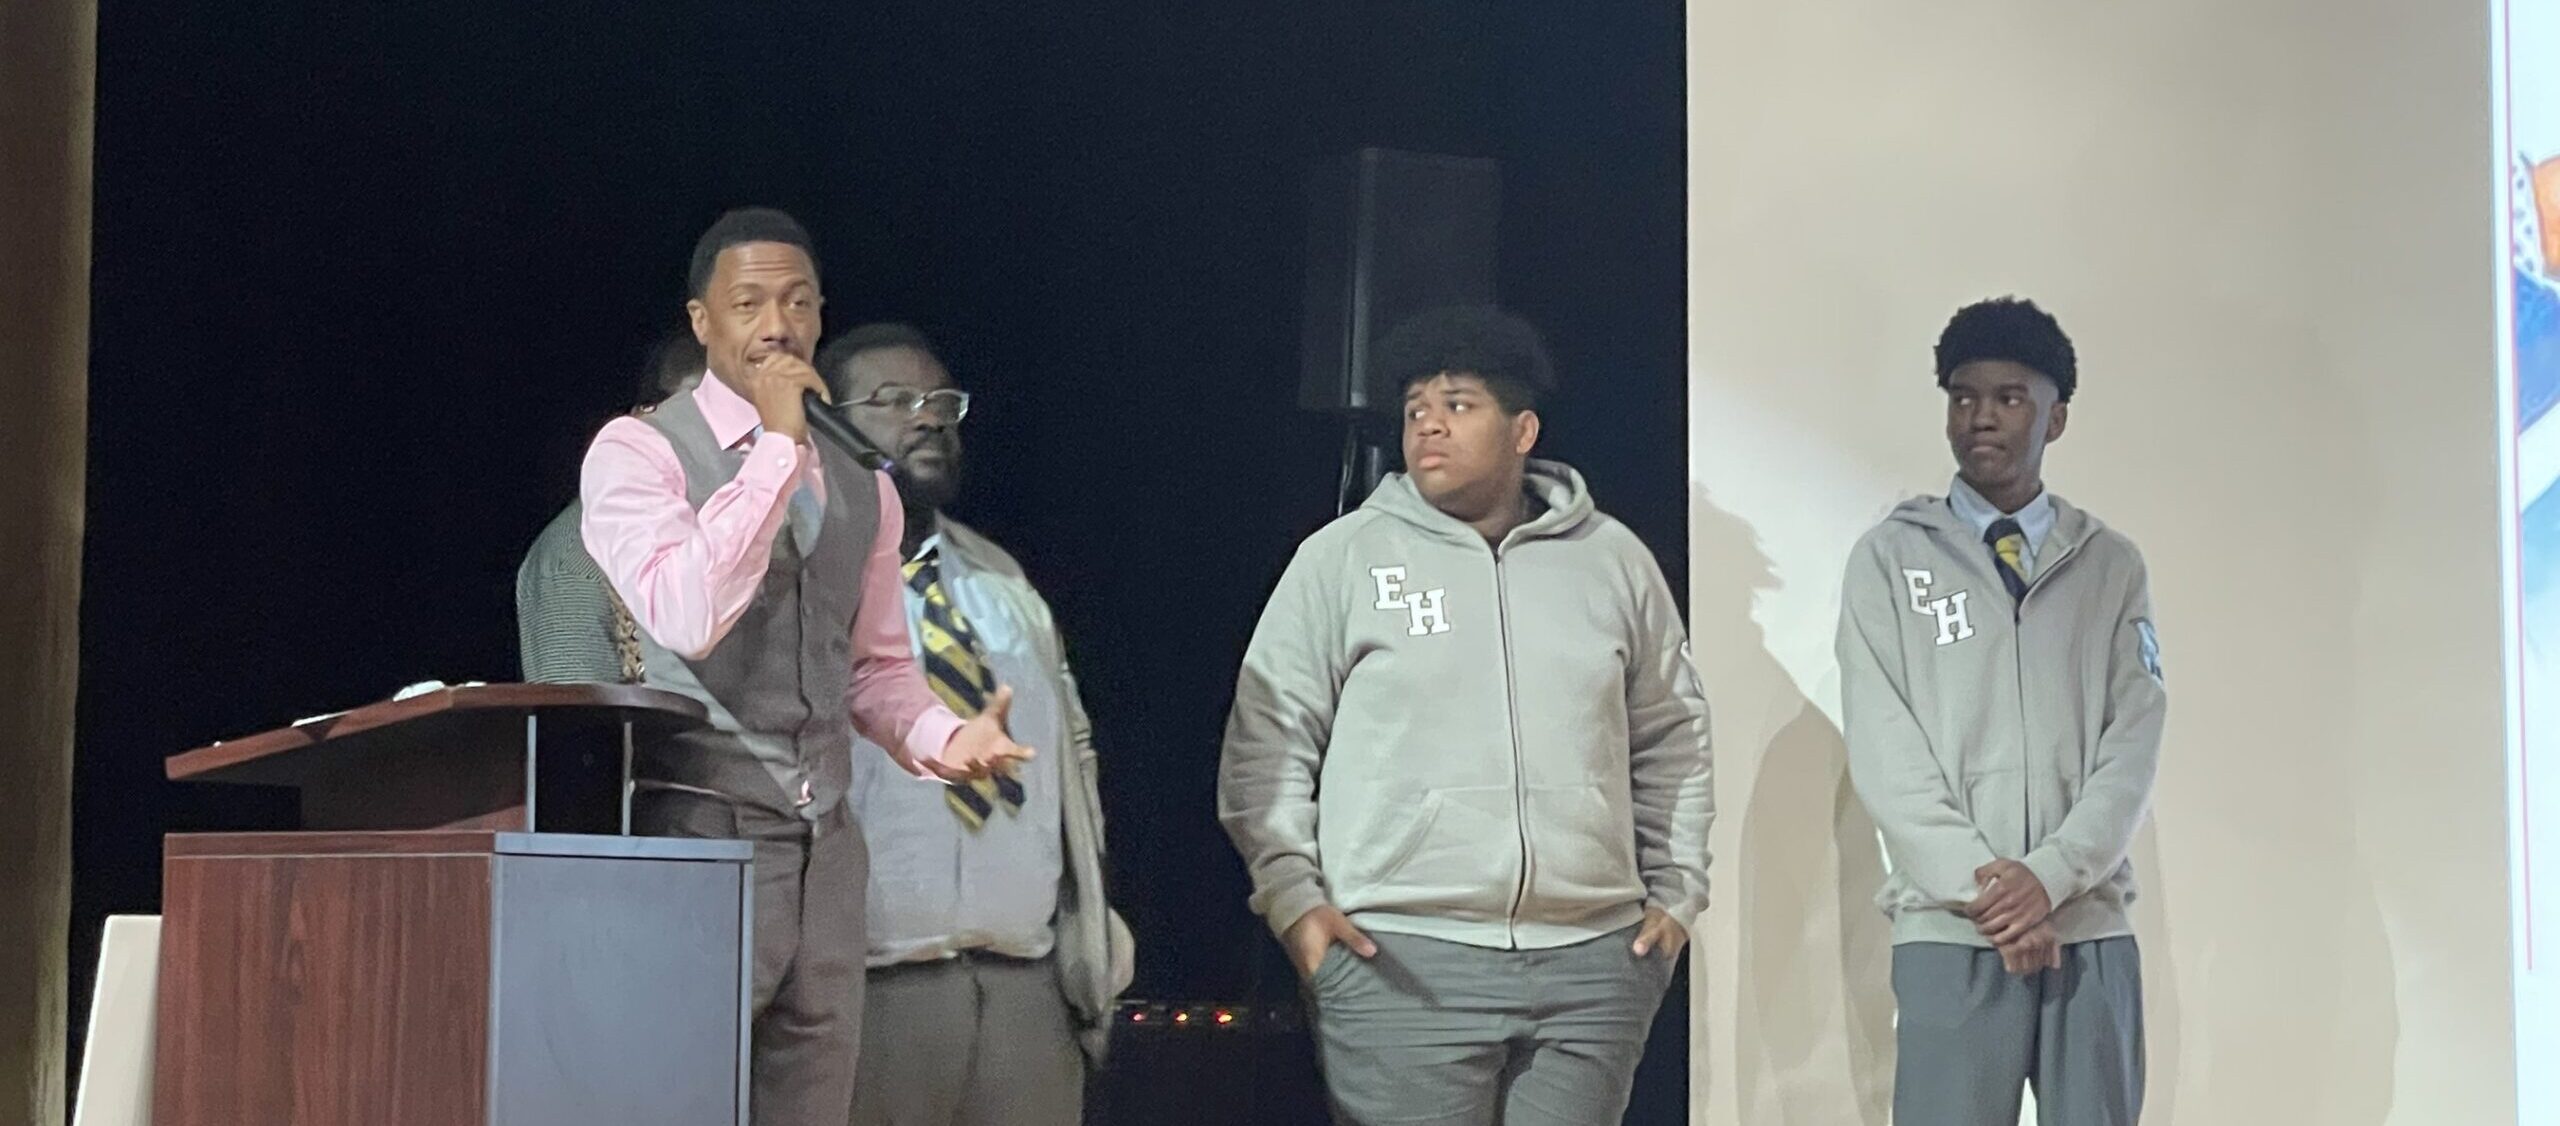 HARLEM TEENS RECEIVE BUSINESS ADVICE FROM NICK CANNON, PLACE THIRD IN NATIONAL PITCH COMPETITION